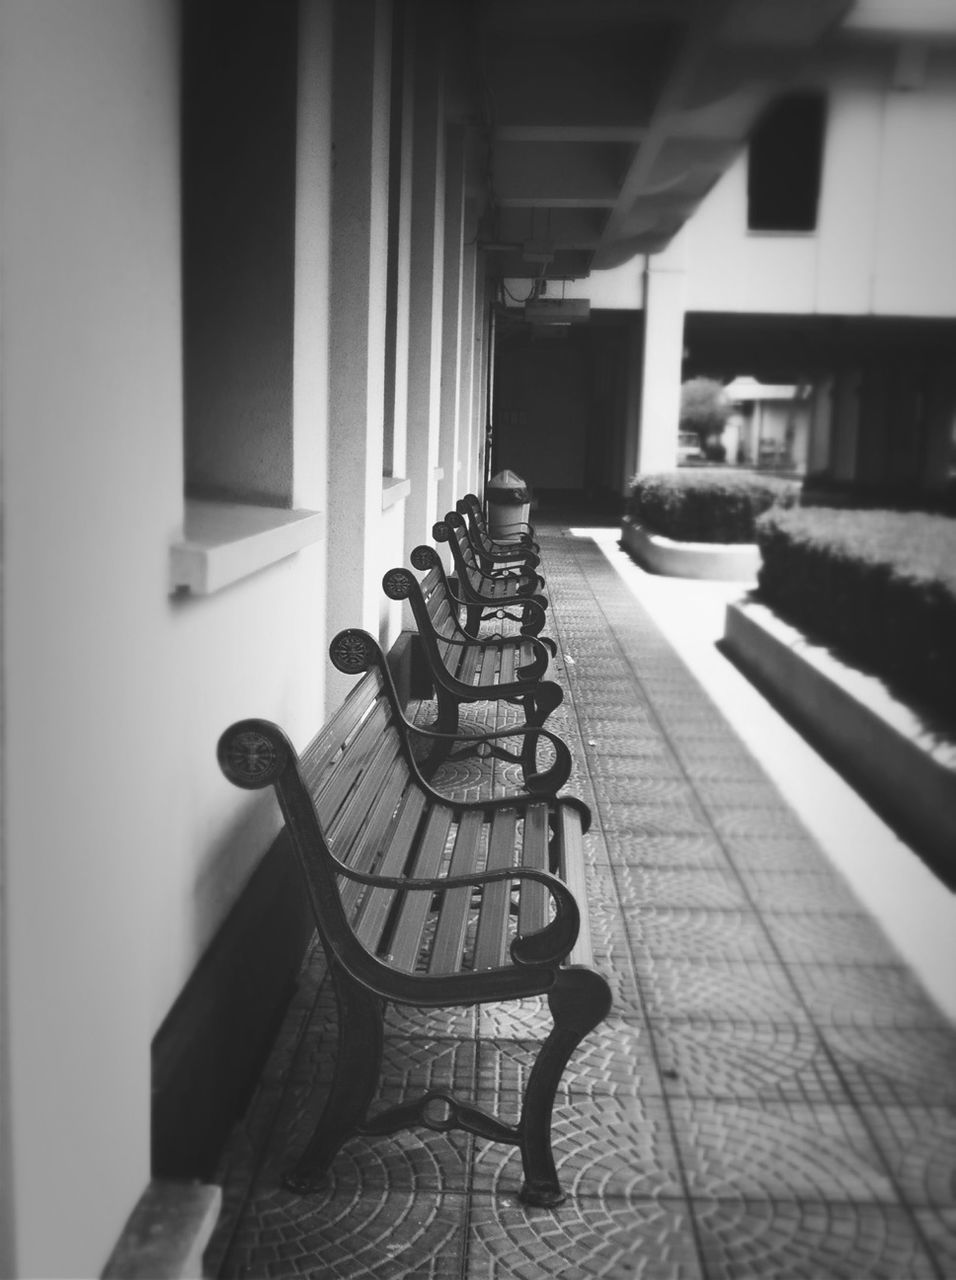 VIEW OF EMPTY CHAIRS